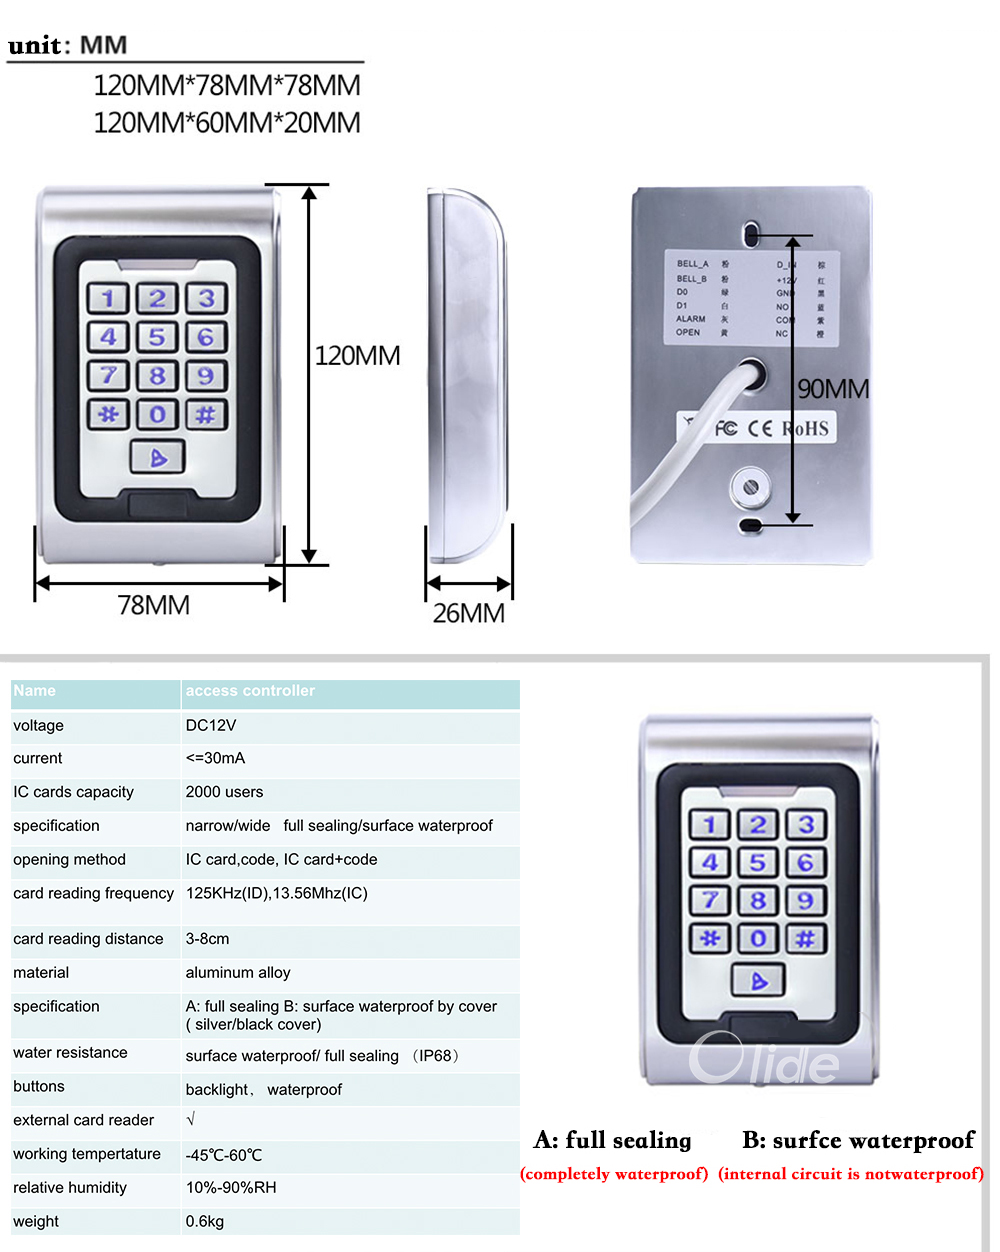 olide waterproof card reader technical specifications